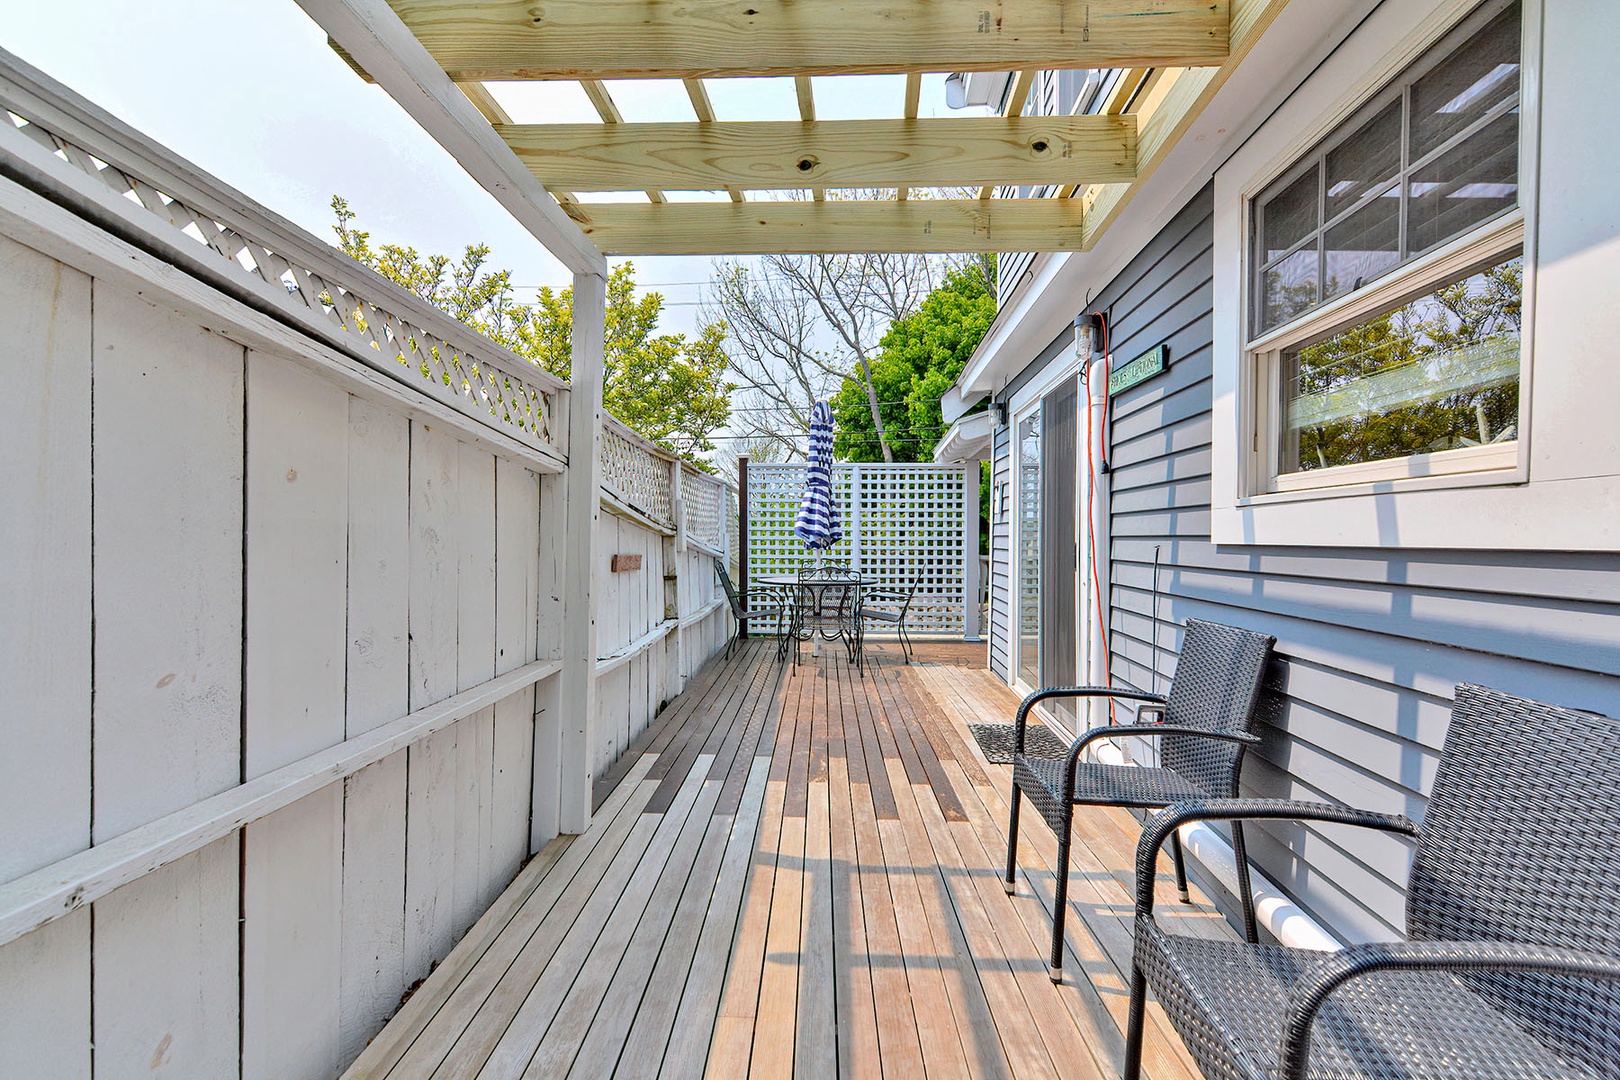 Enjoy morning coffee or dining alfresco on the porch.